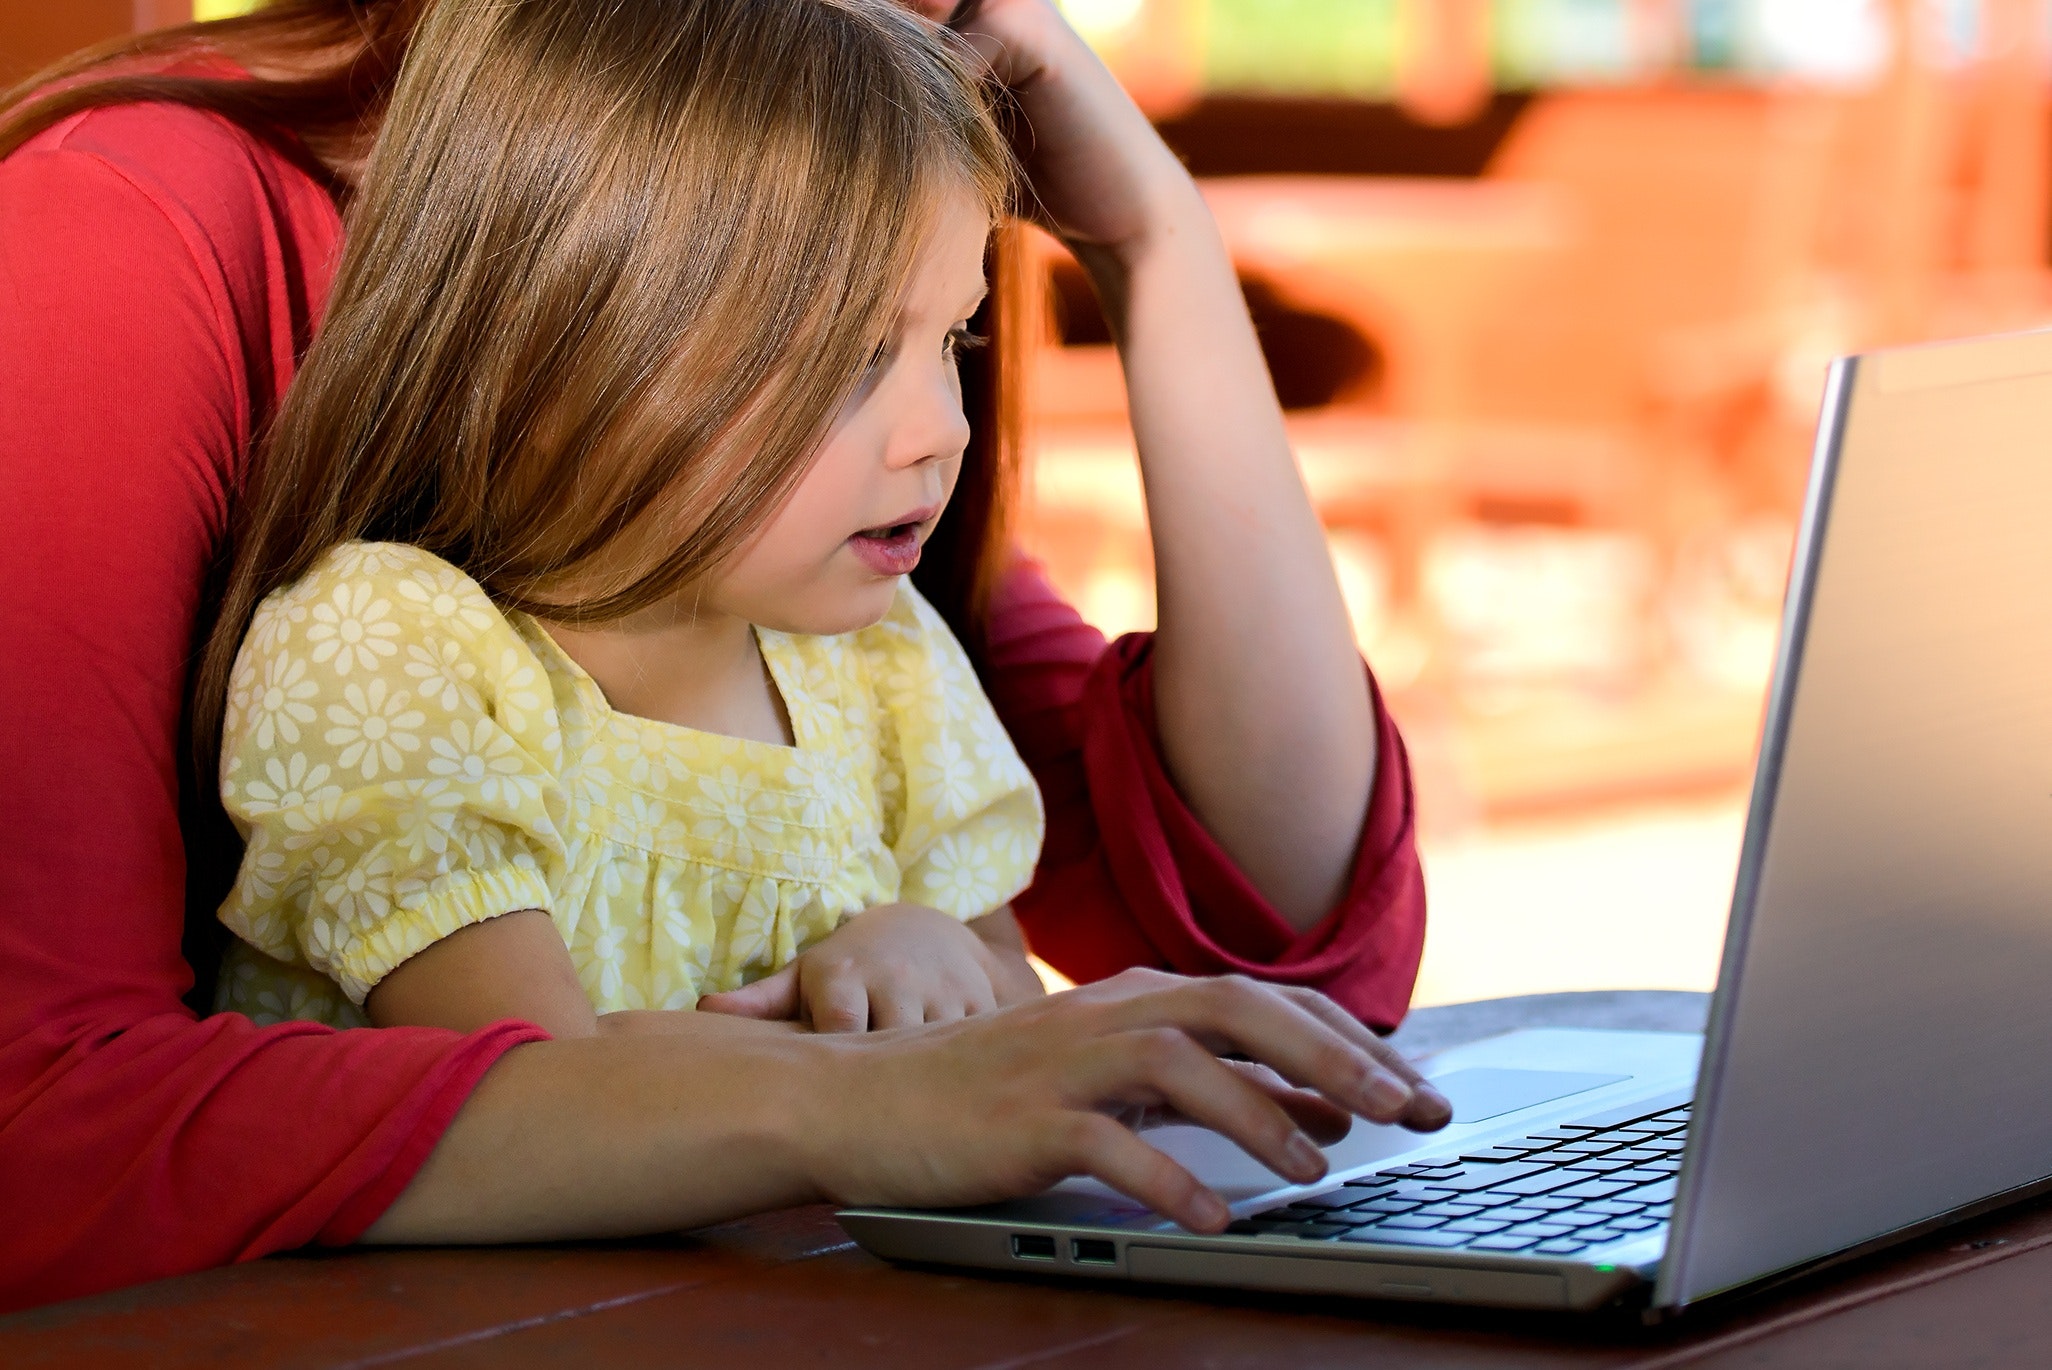 Brunette Woman in Red With Girl in Yellow on Lap Before Laptop, Child, Computer, Cute, Girl, HQ Photo